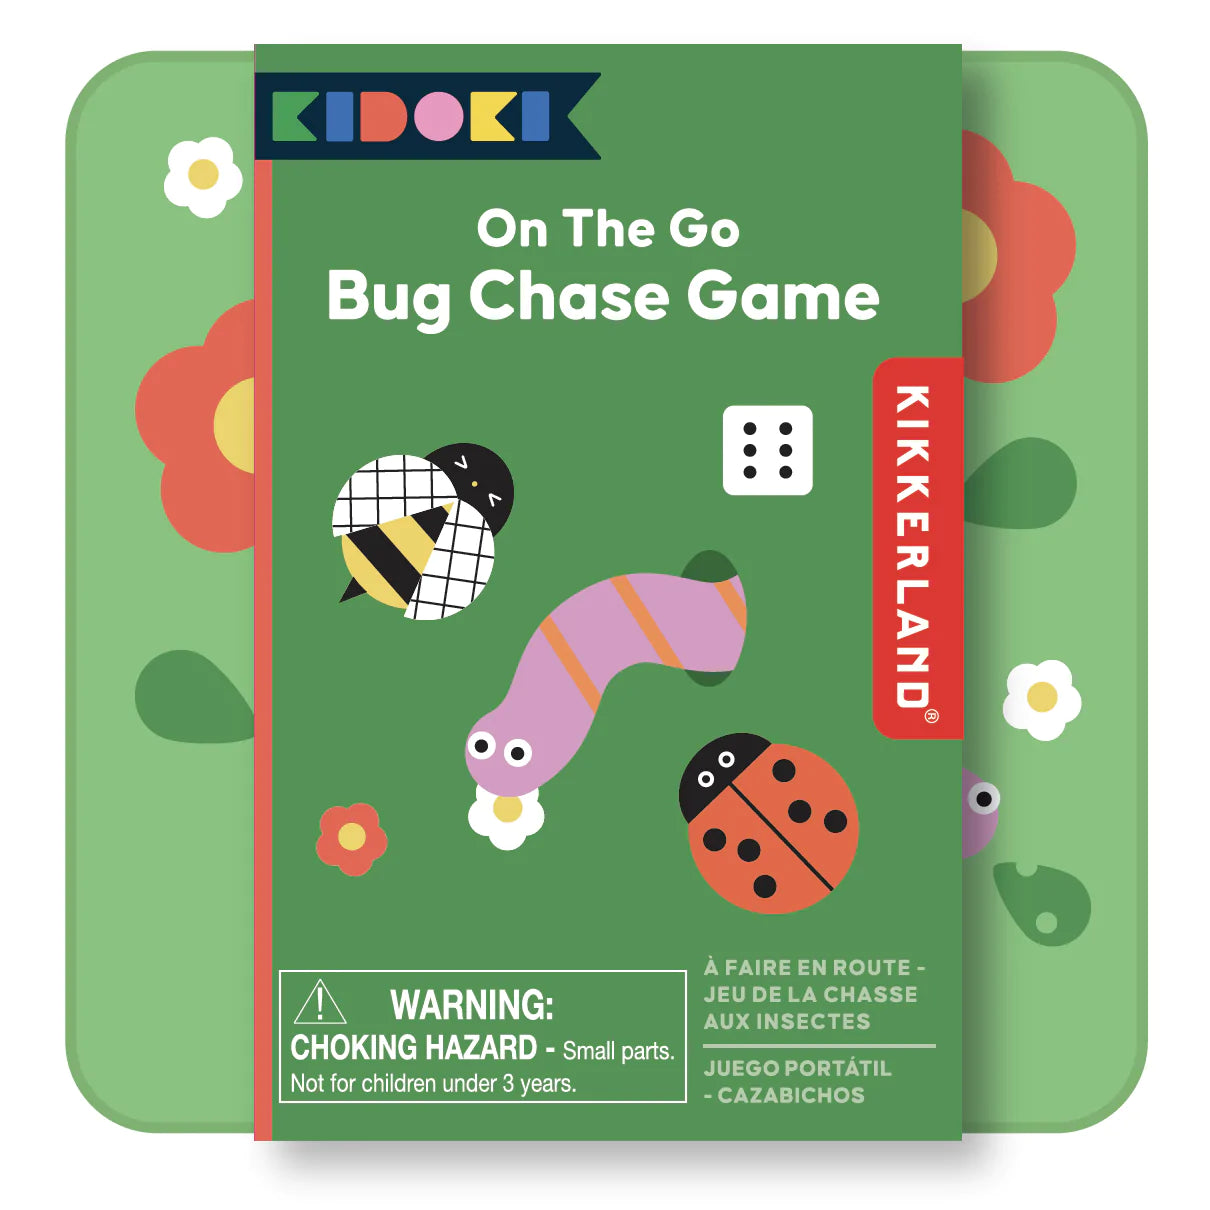 On The Go Bug Chase Game